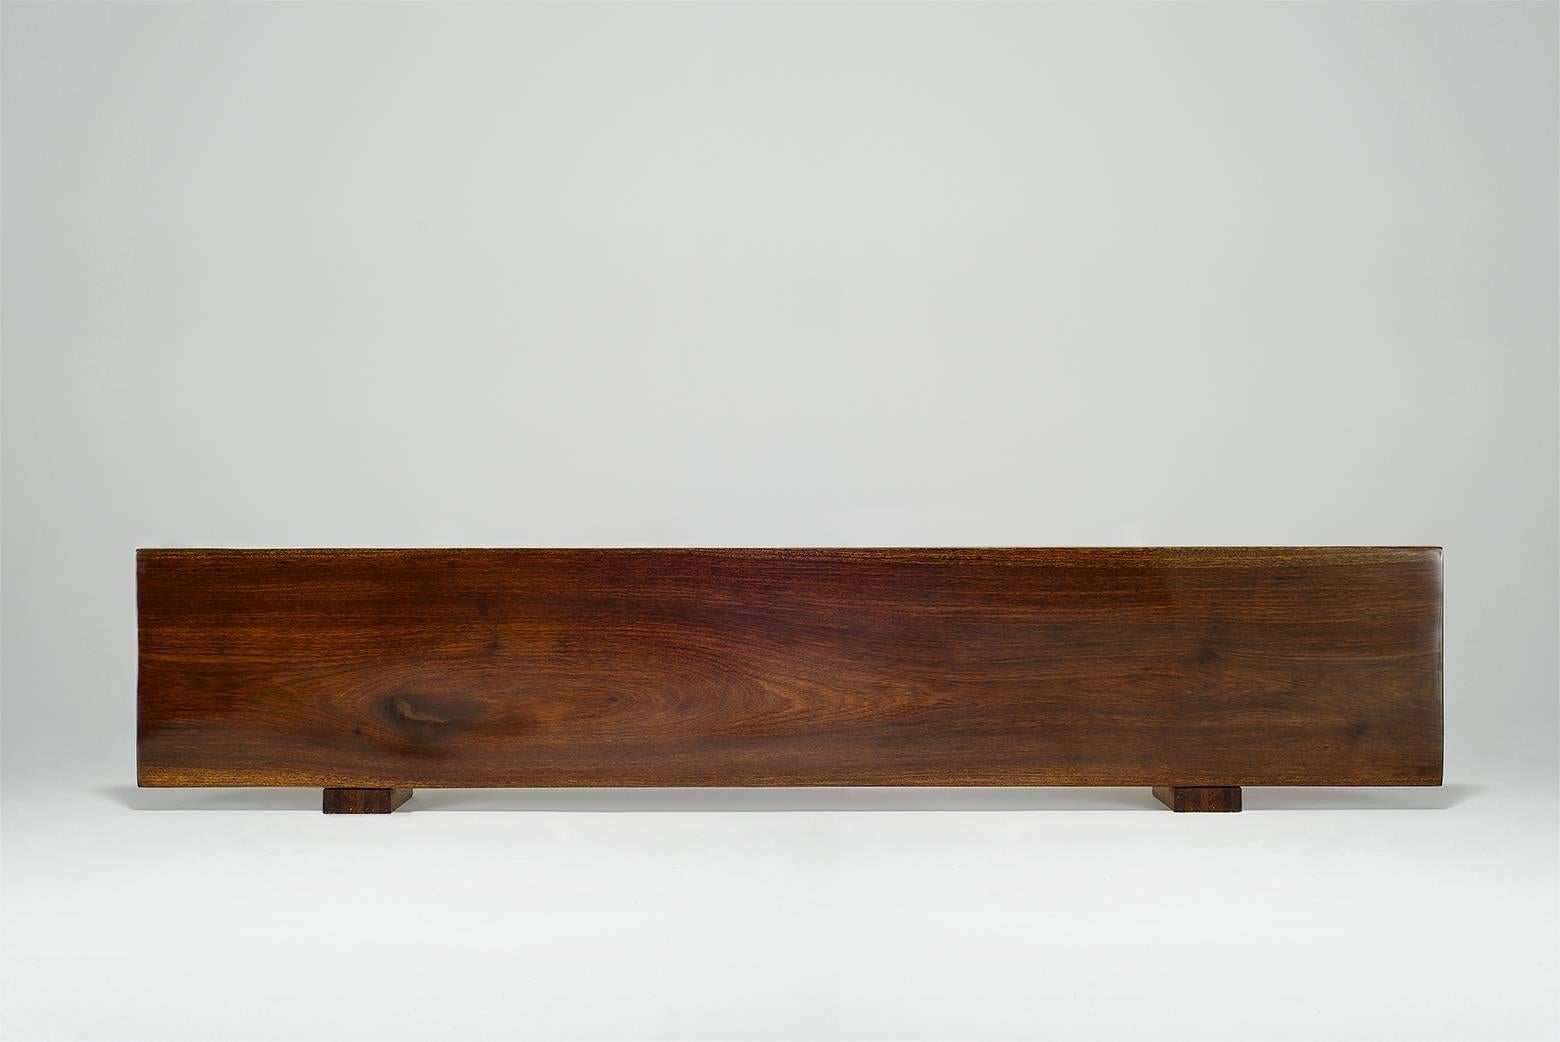 We created this gem for an exhibition with works by French artist Jean-Louis Dulaar.

We needed a refined console under one of his works and picked a superb piece of chicken-wing wood from our collection and decided to apply our